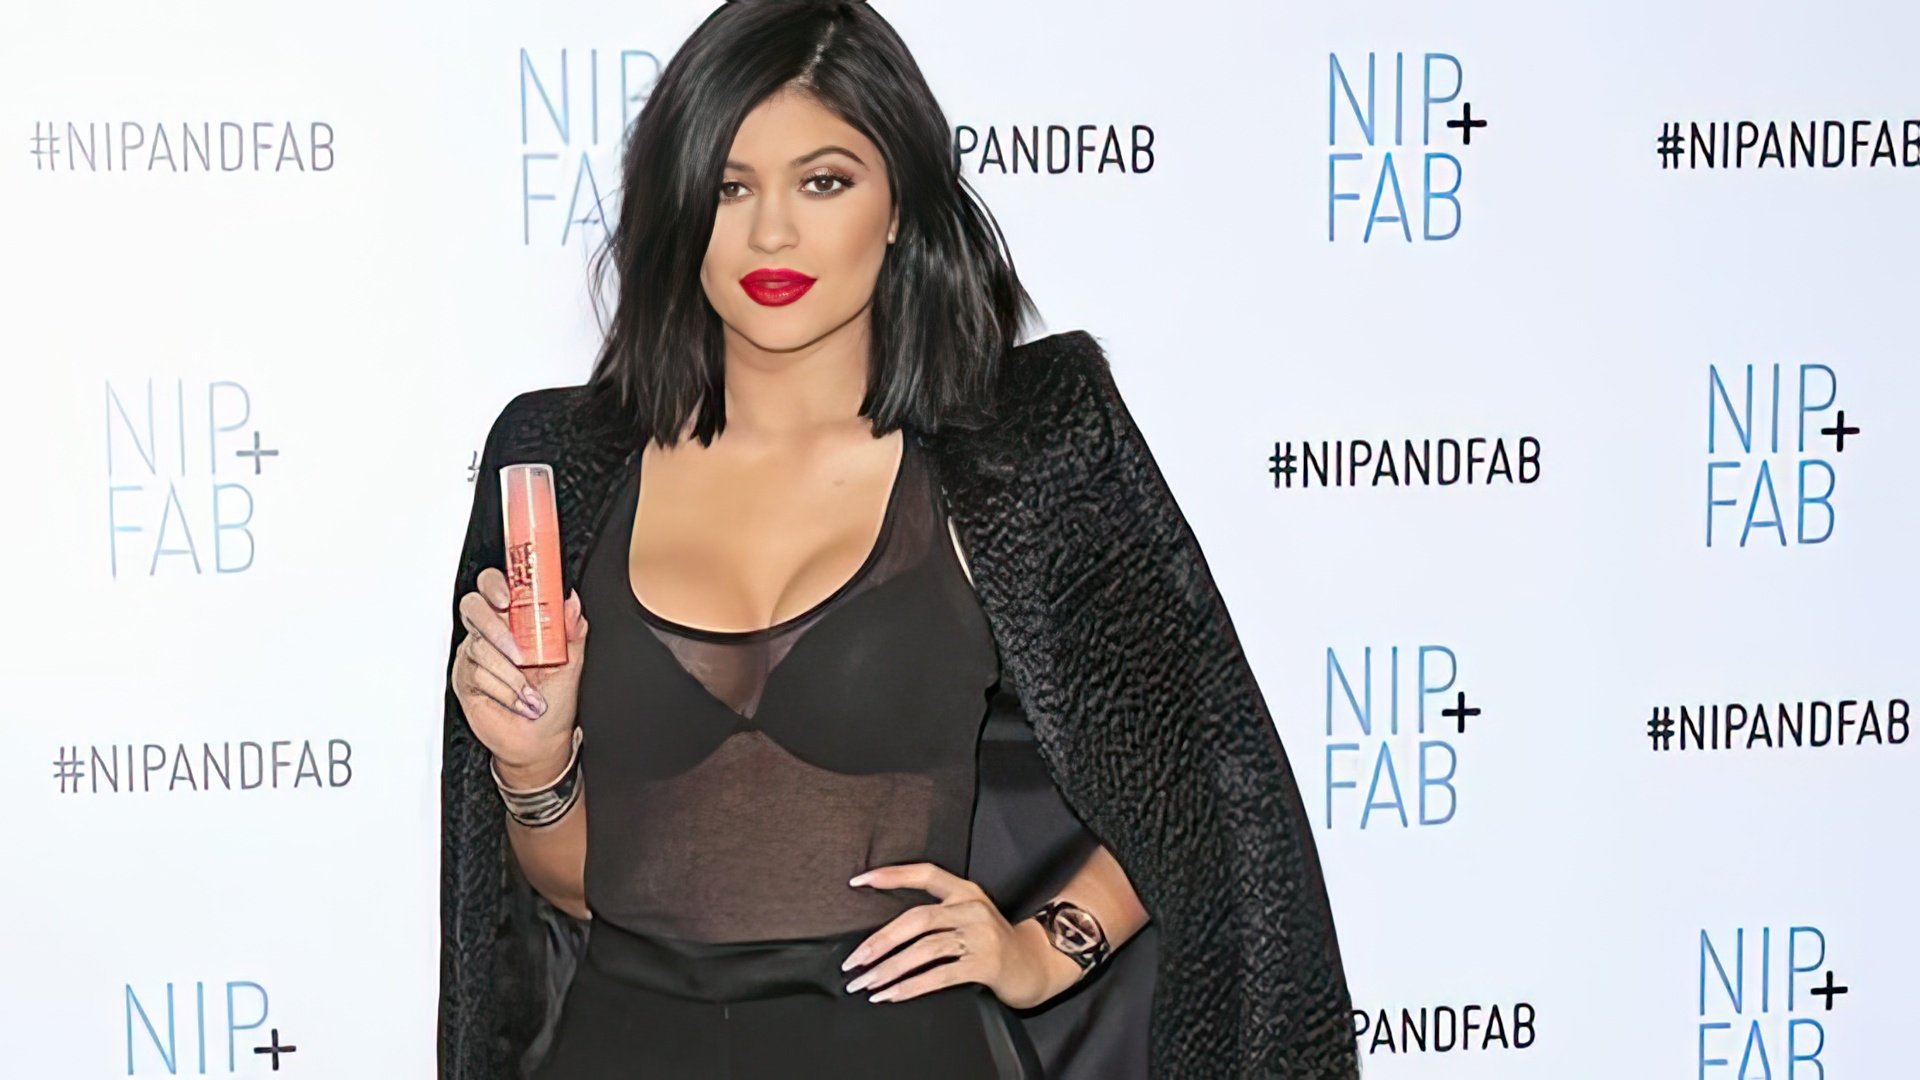 Kylie Jenner became the face of Nip+Fab